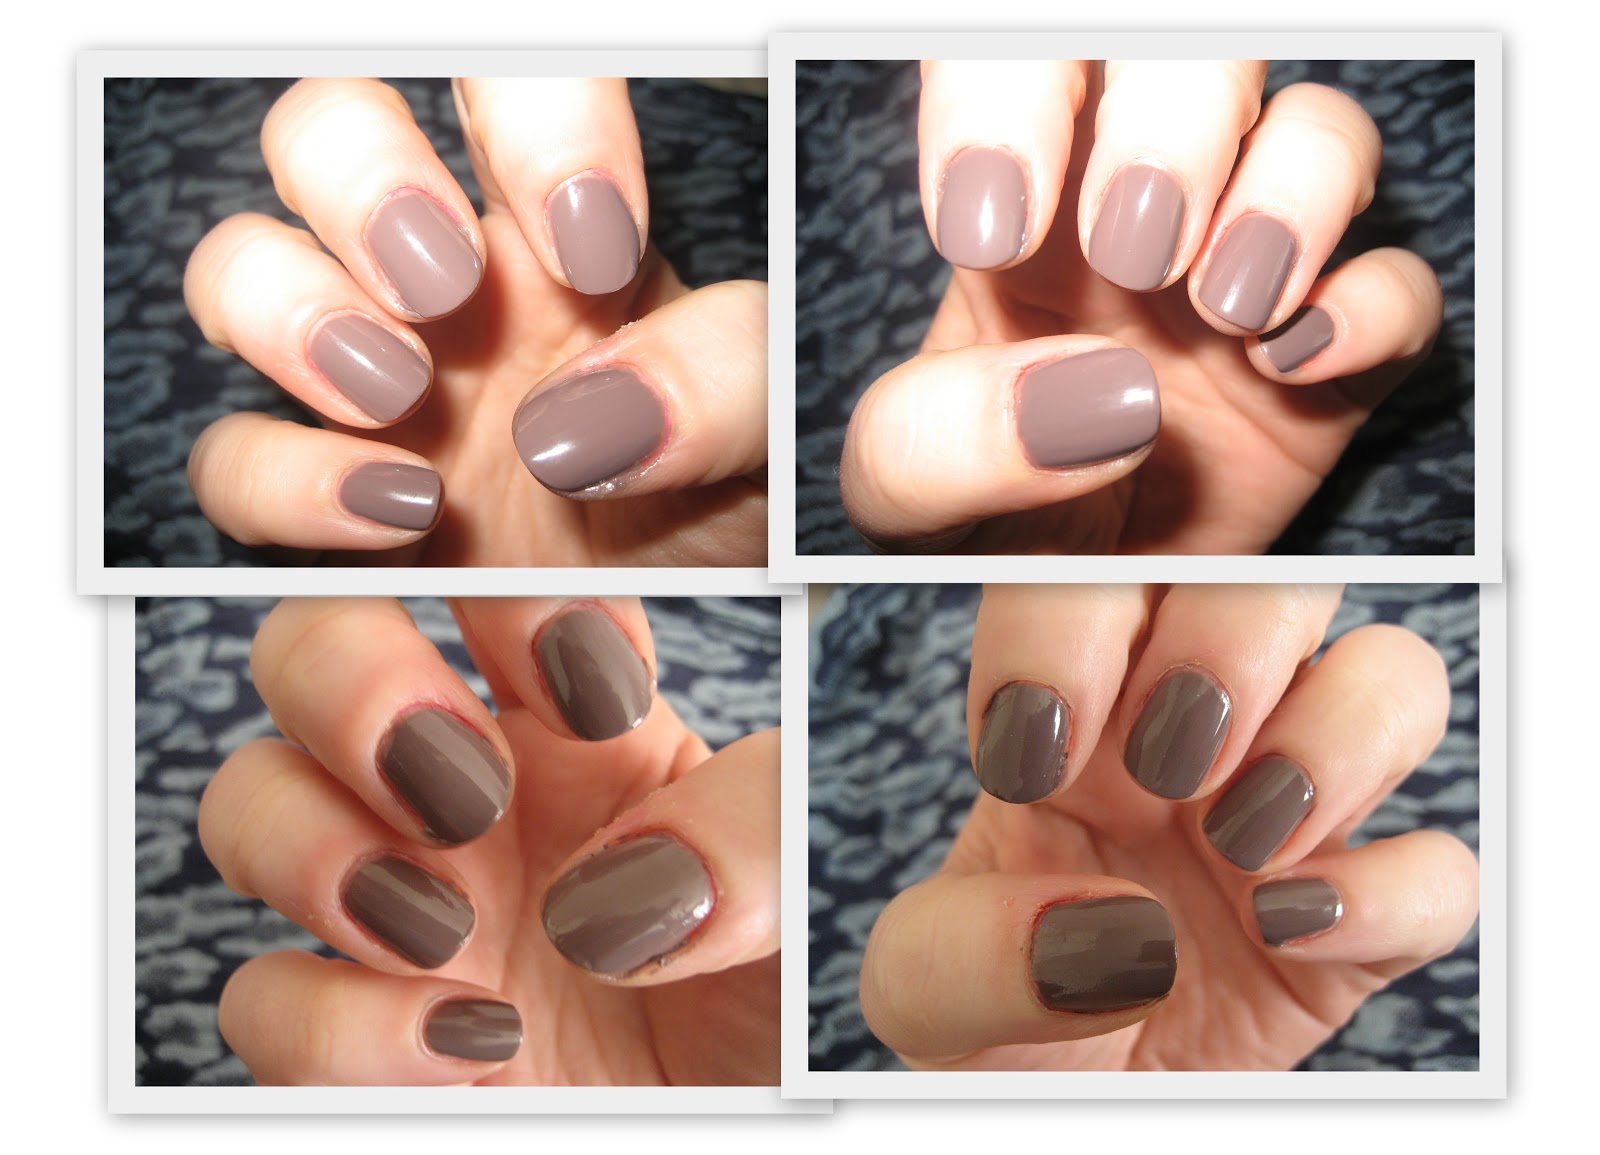 3. "Short and Chic" by Sally Hansen - wide 4